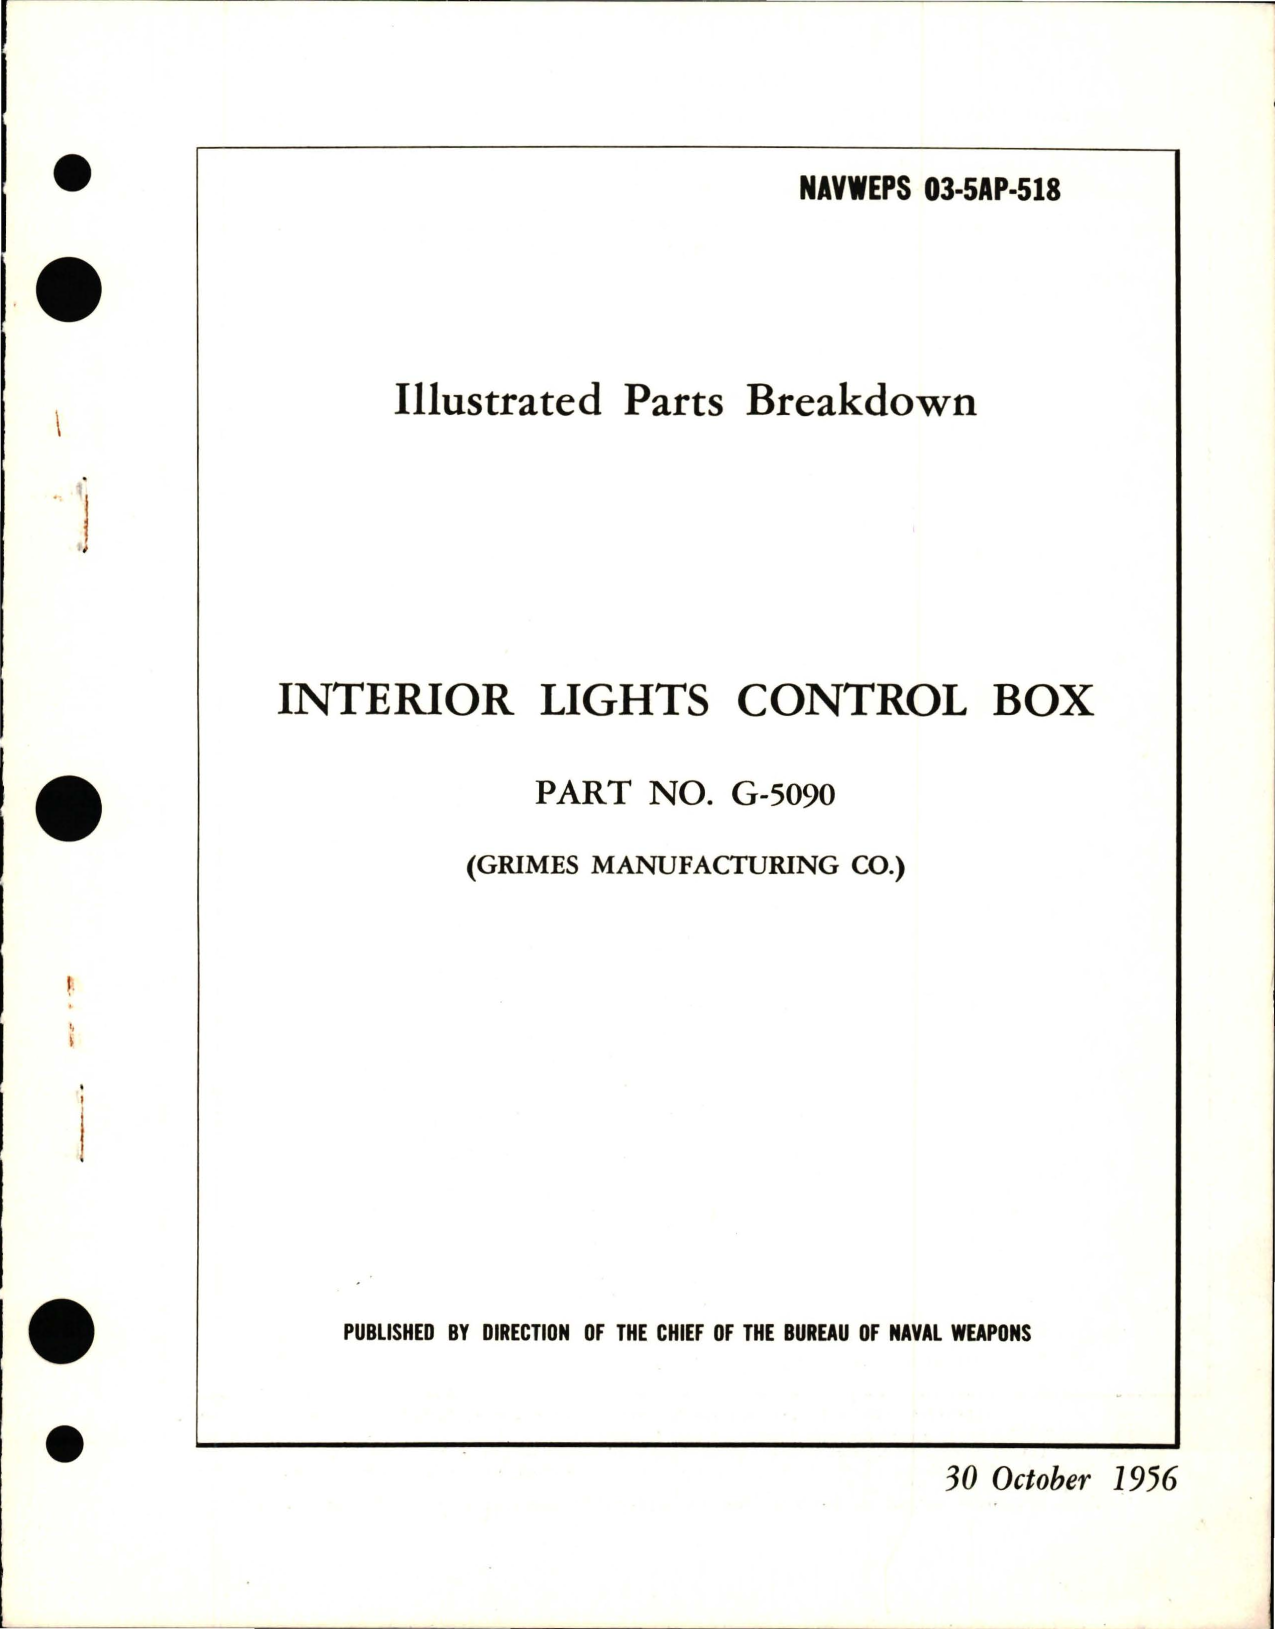 Sample page 1 from AirCorps Library document: Illustrated Parts Breakdown for Interior Lights Control Box - Part G-5090 